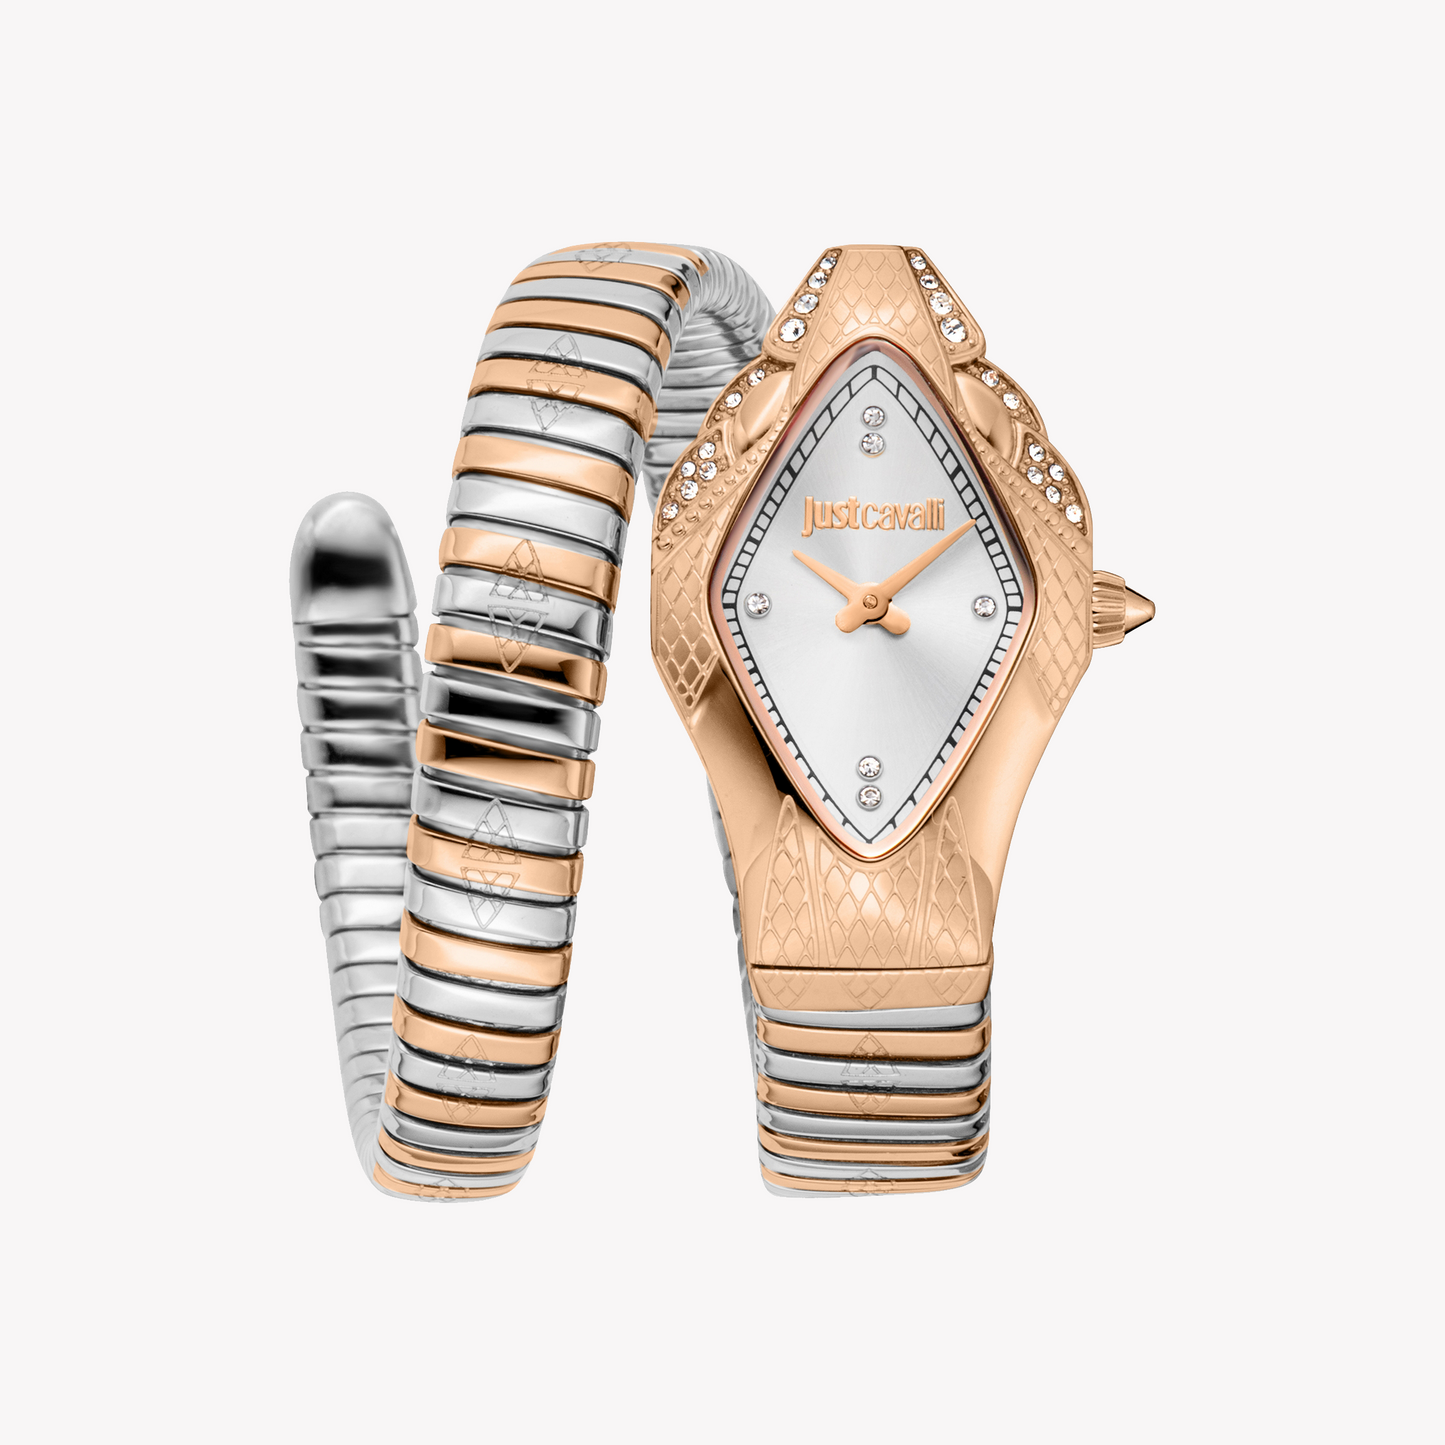 Just Cavalli Rose Gold Stainless Steel Women's Watch